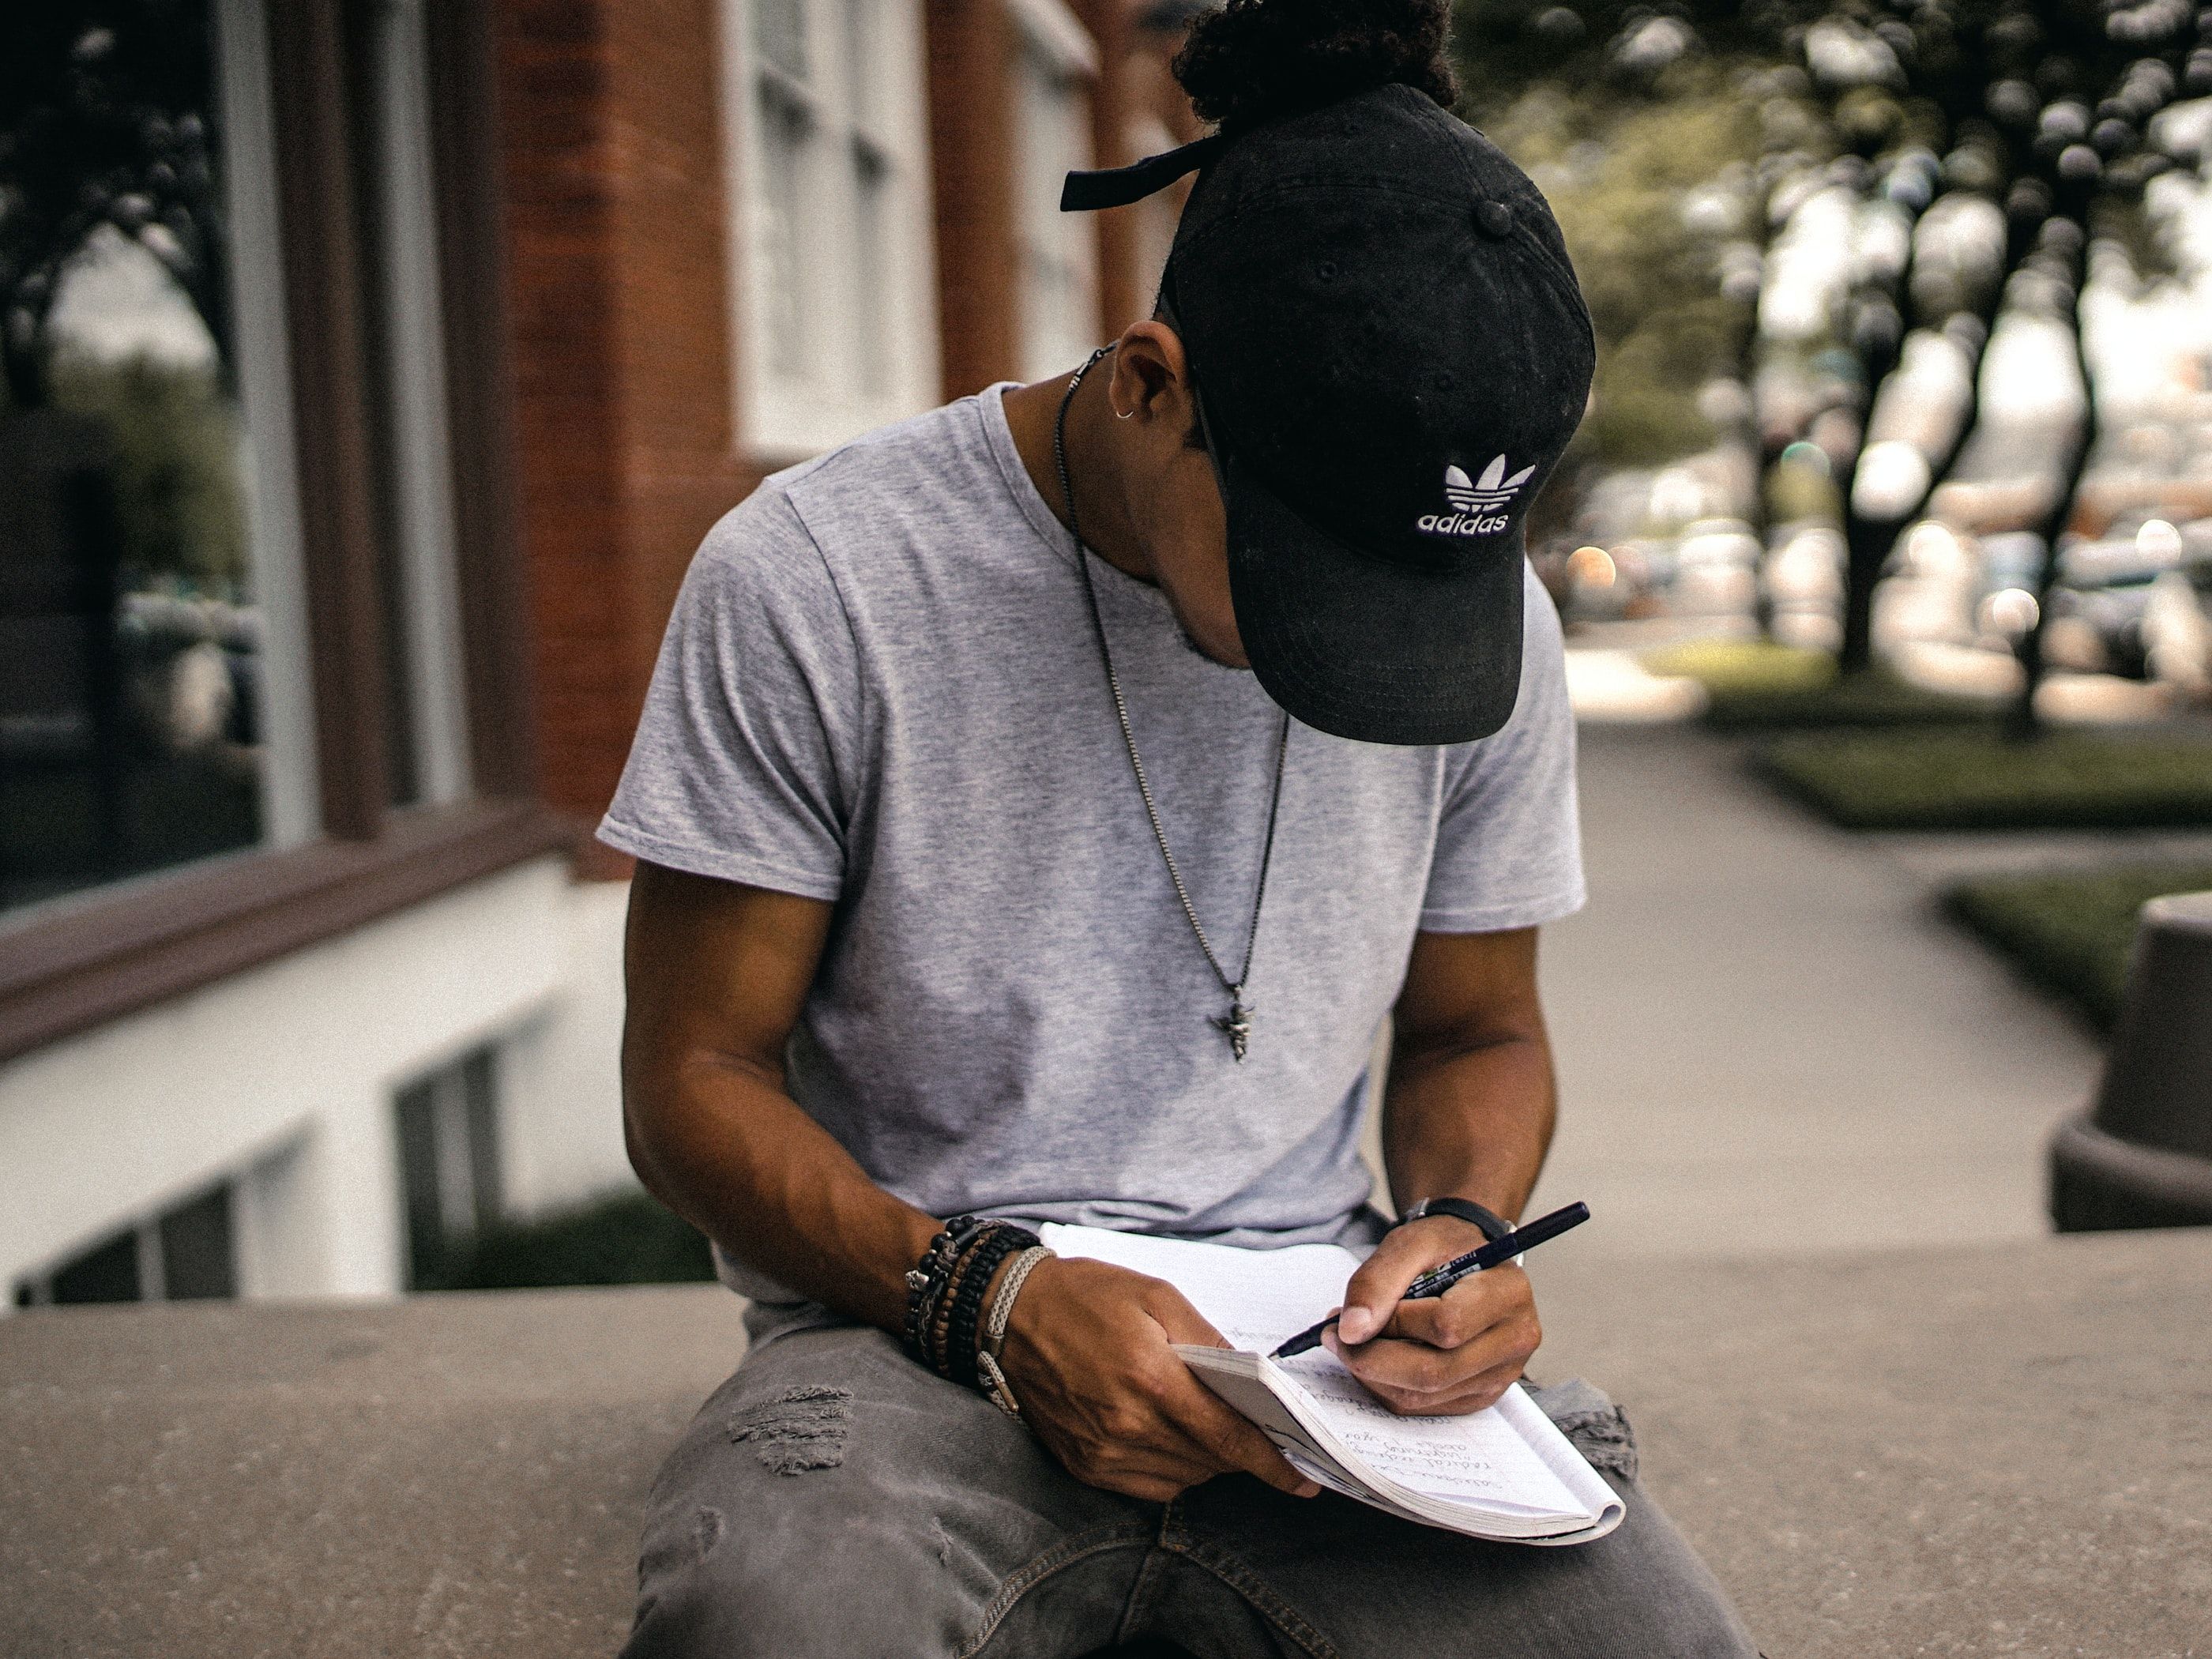 Writing on the Go is what people who have something to share do. It’s the #1 Writing Tip. Writers gotta Write. Photo by Brad Neathery on Unsplash